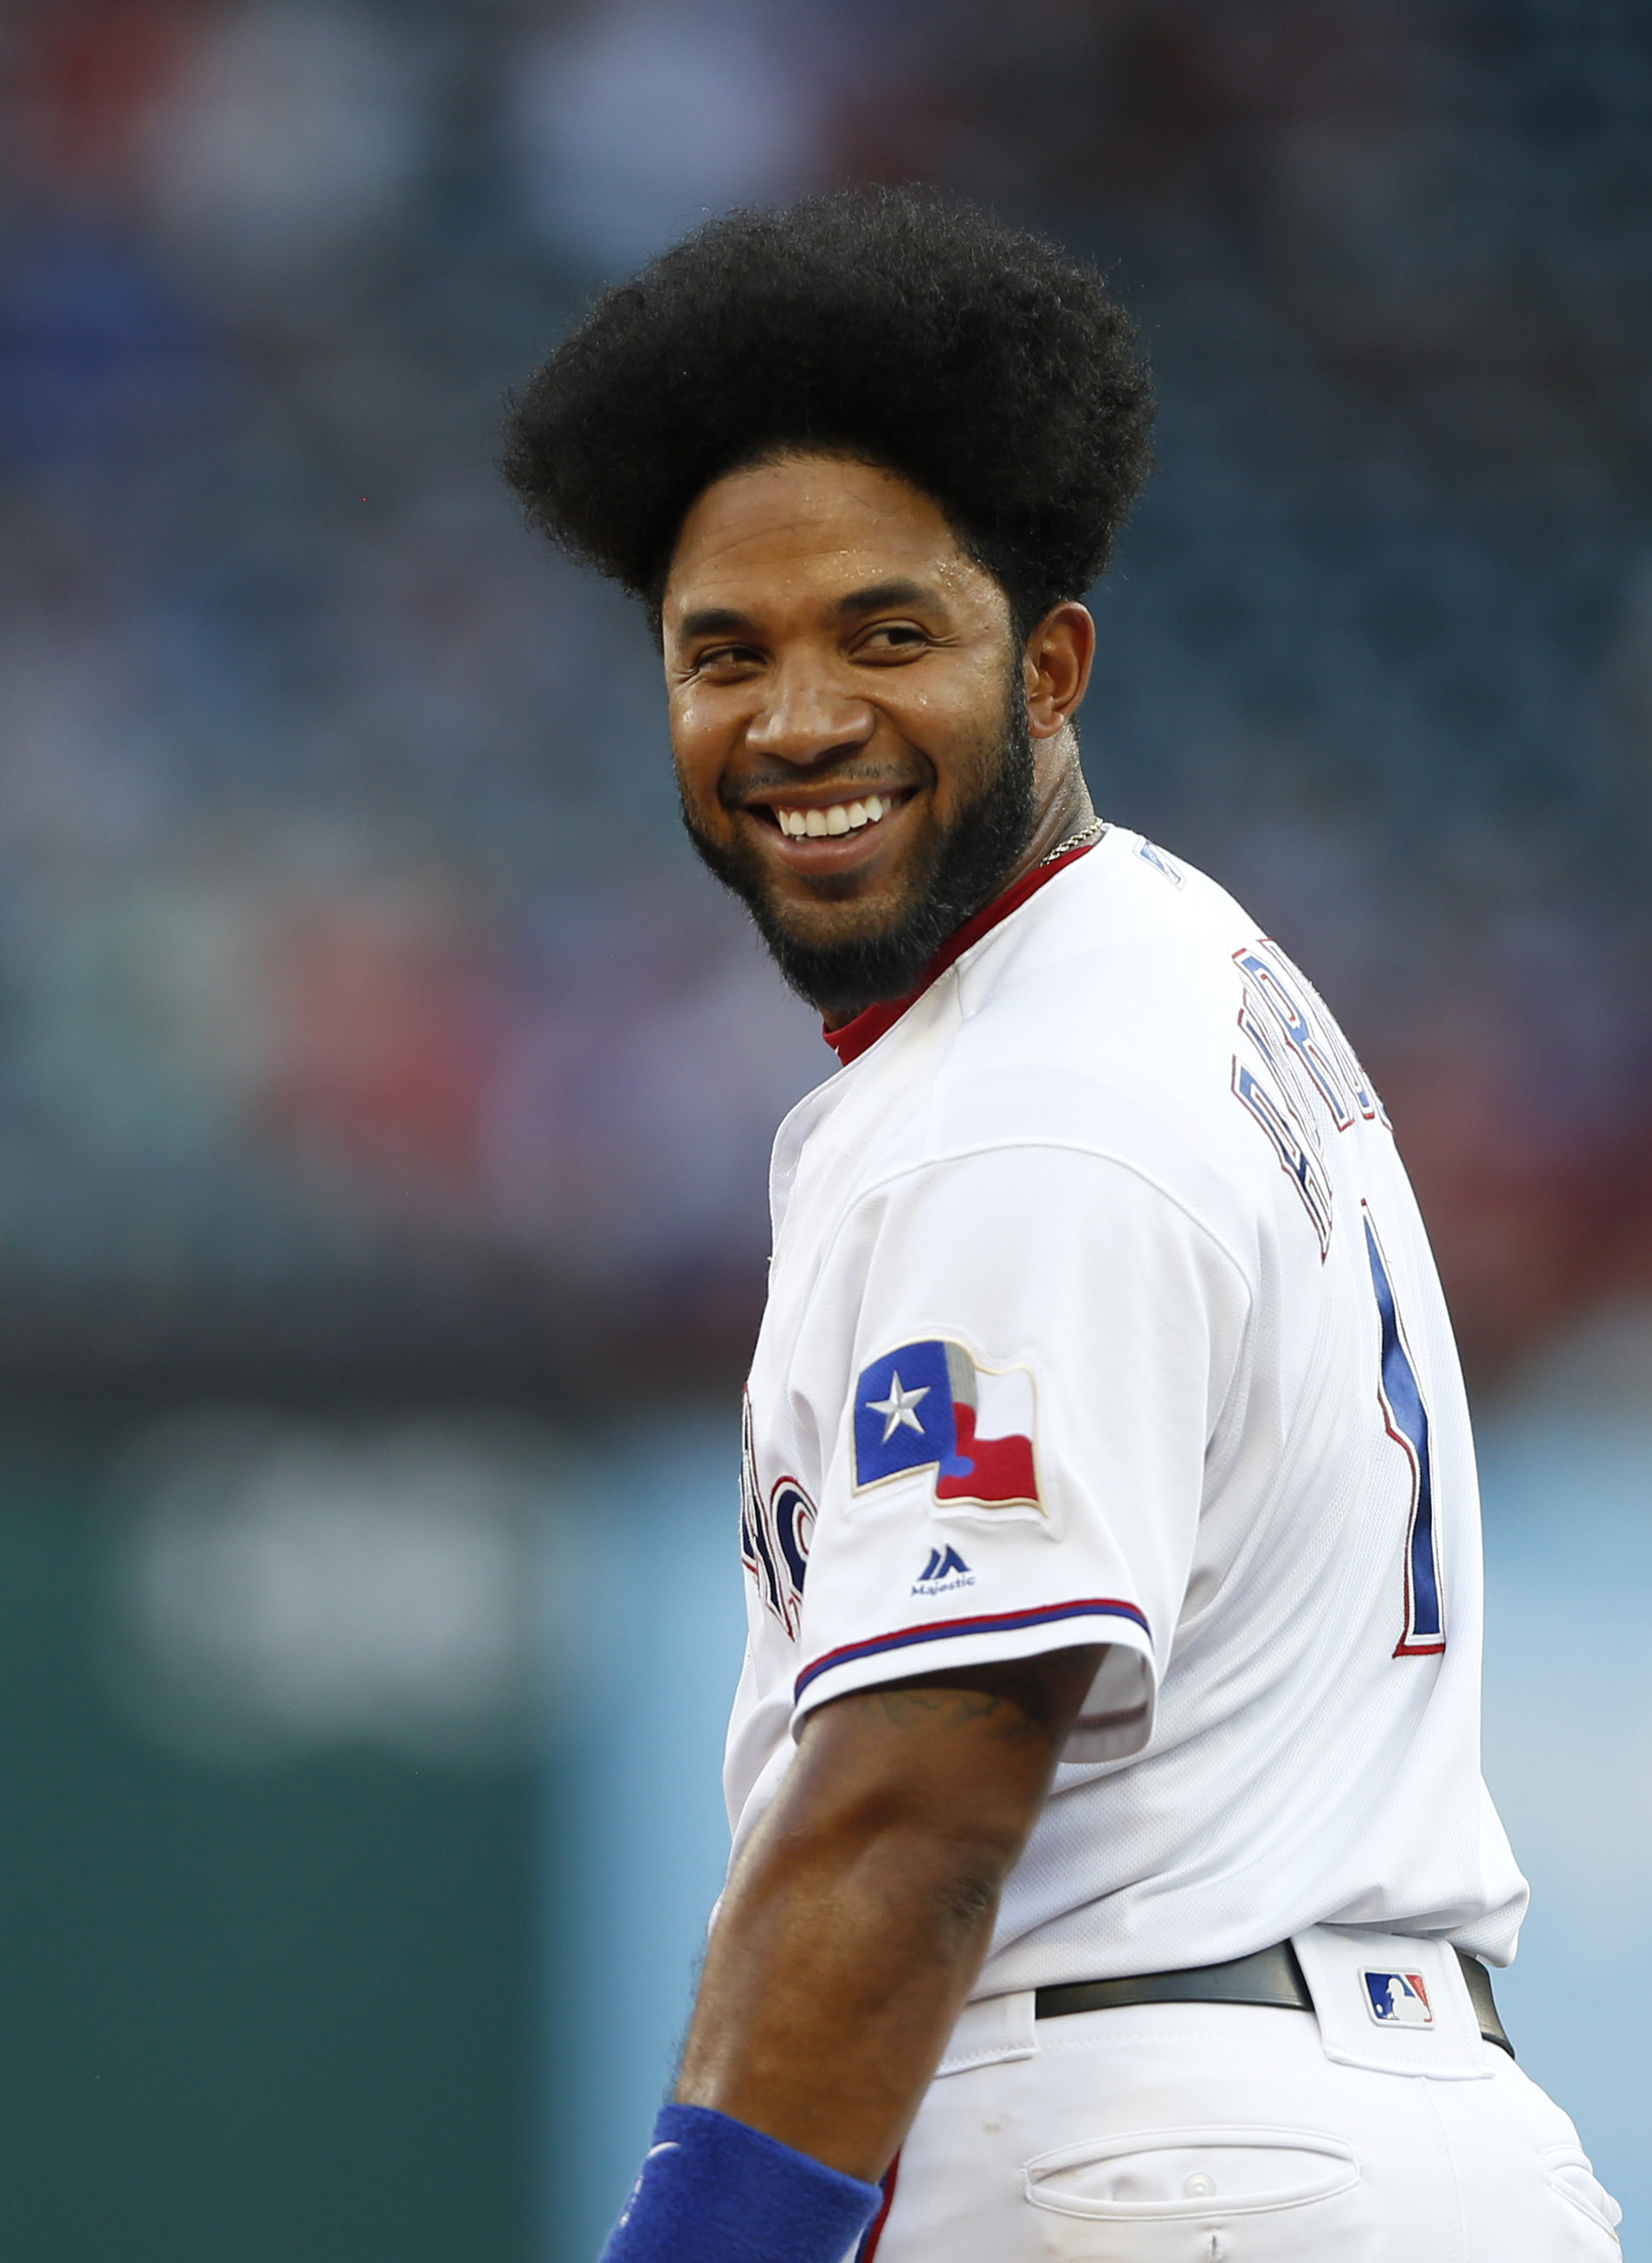 Trading Elvis Andrus was the right move, but that doesn't mean the Rangers  won't miss him